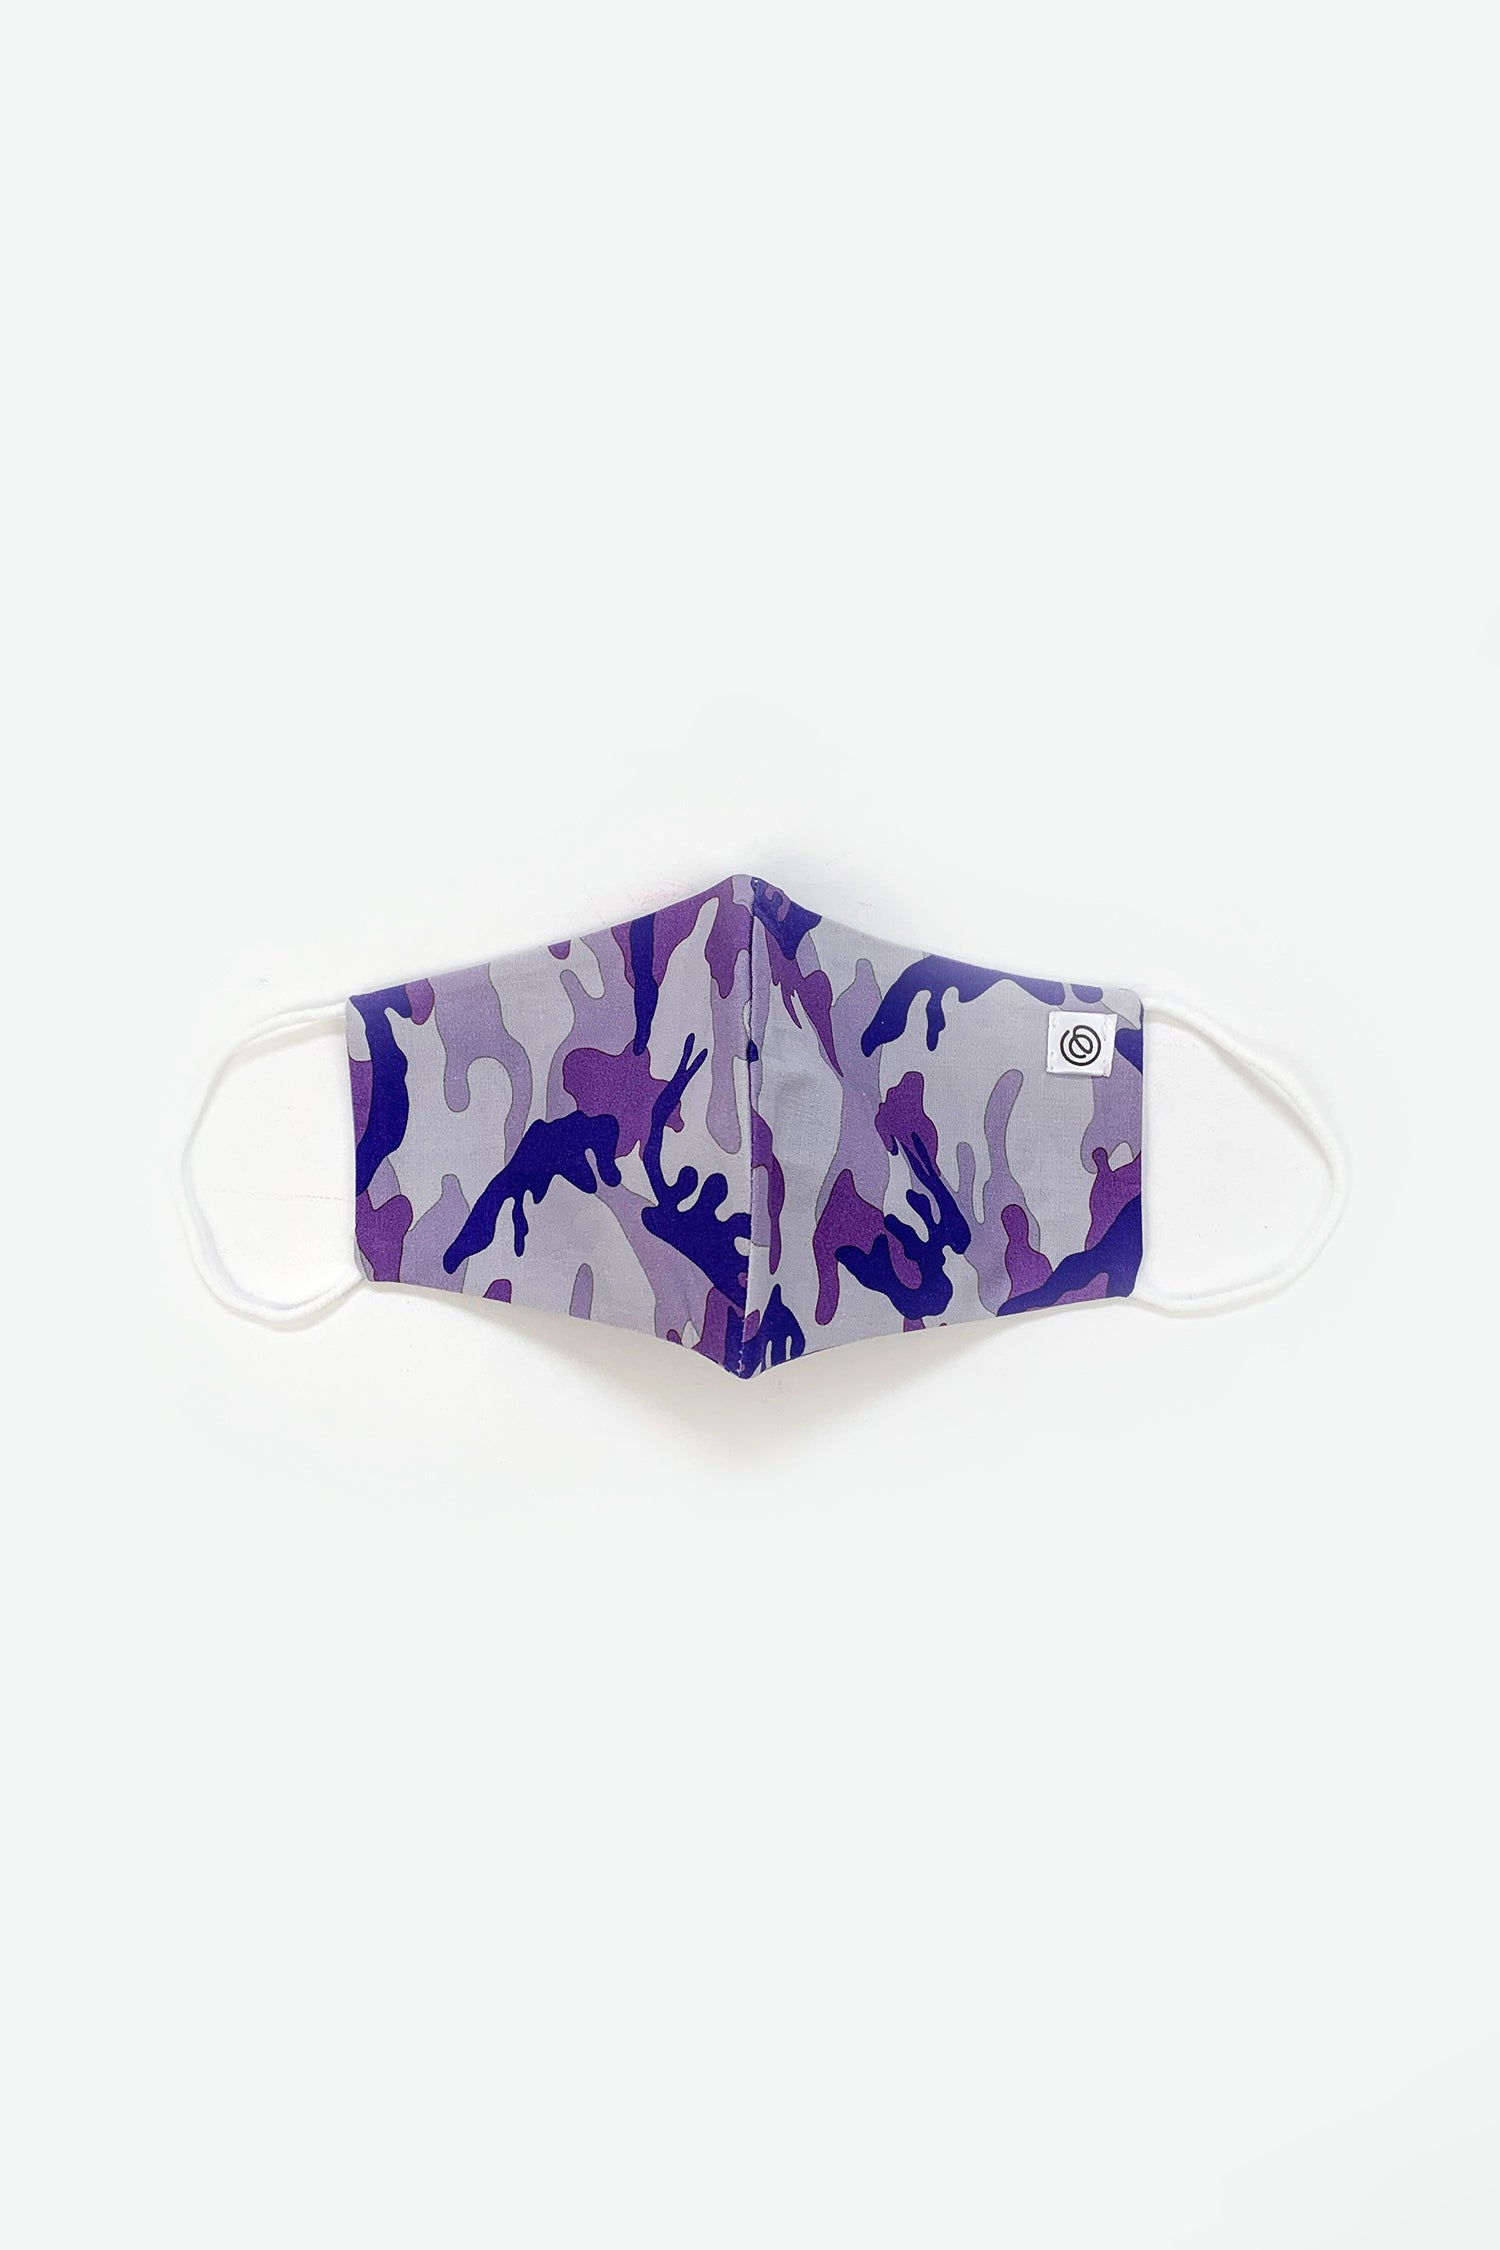 Easy Mondays Full Face Mask in Purple Camo